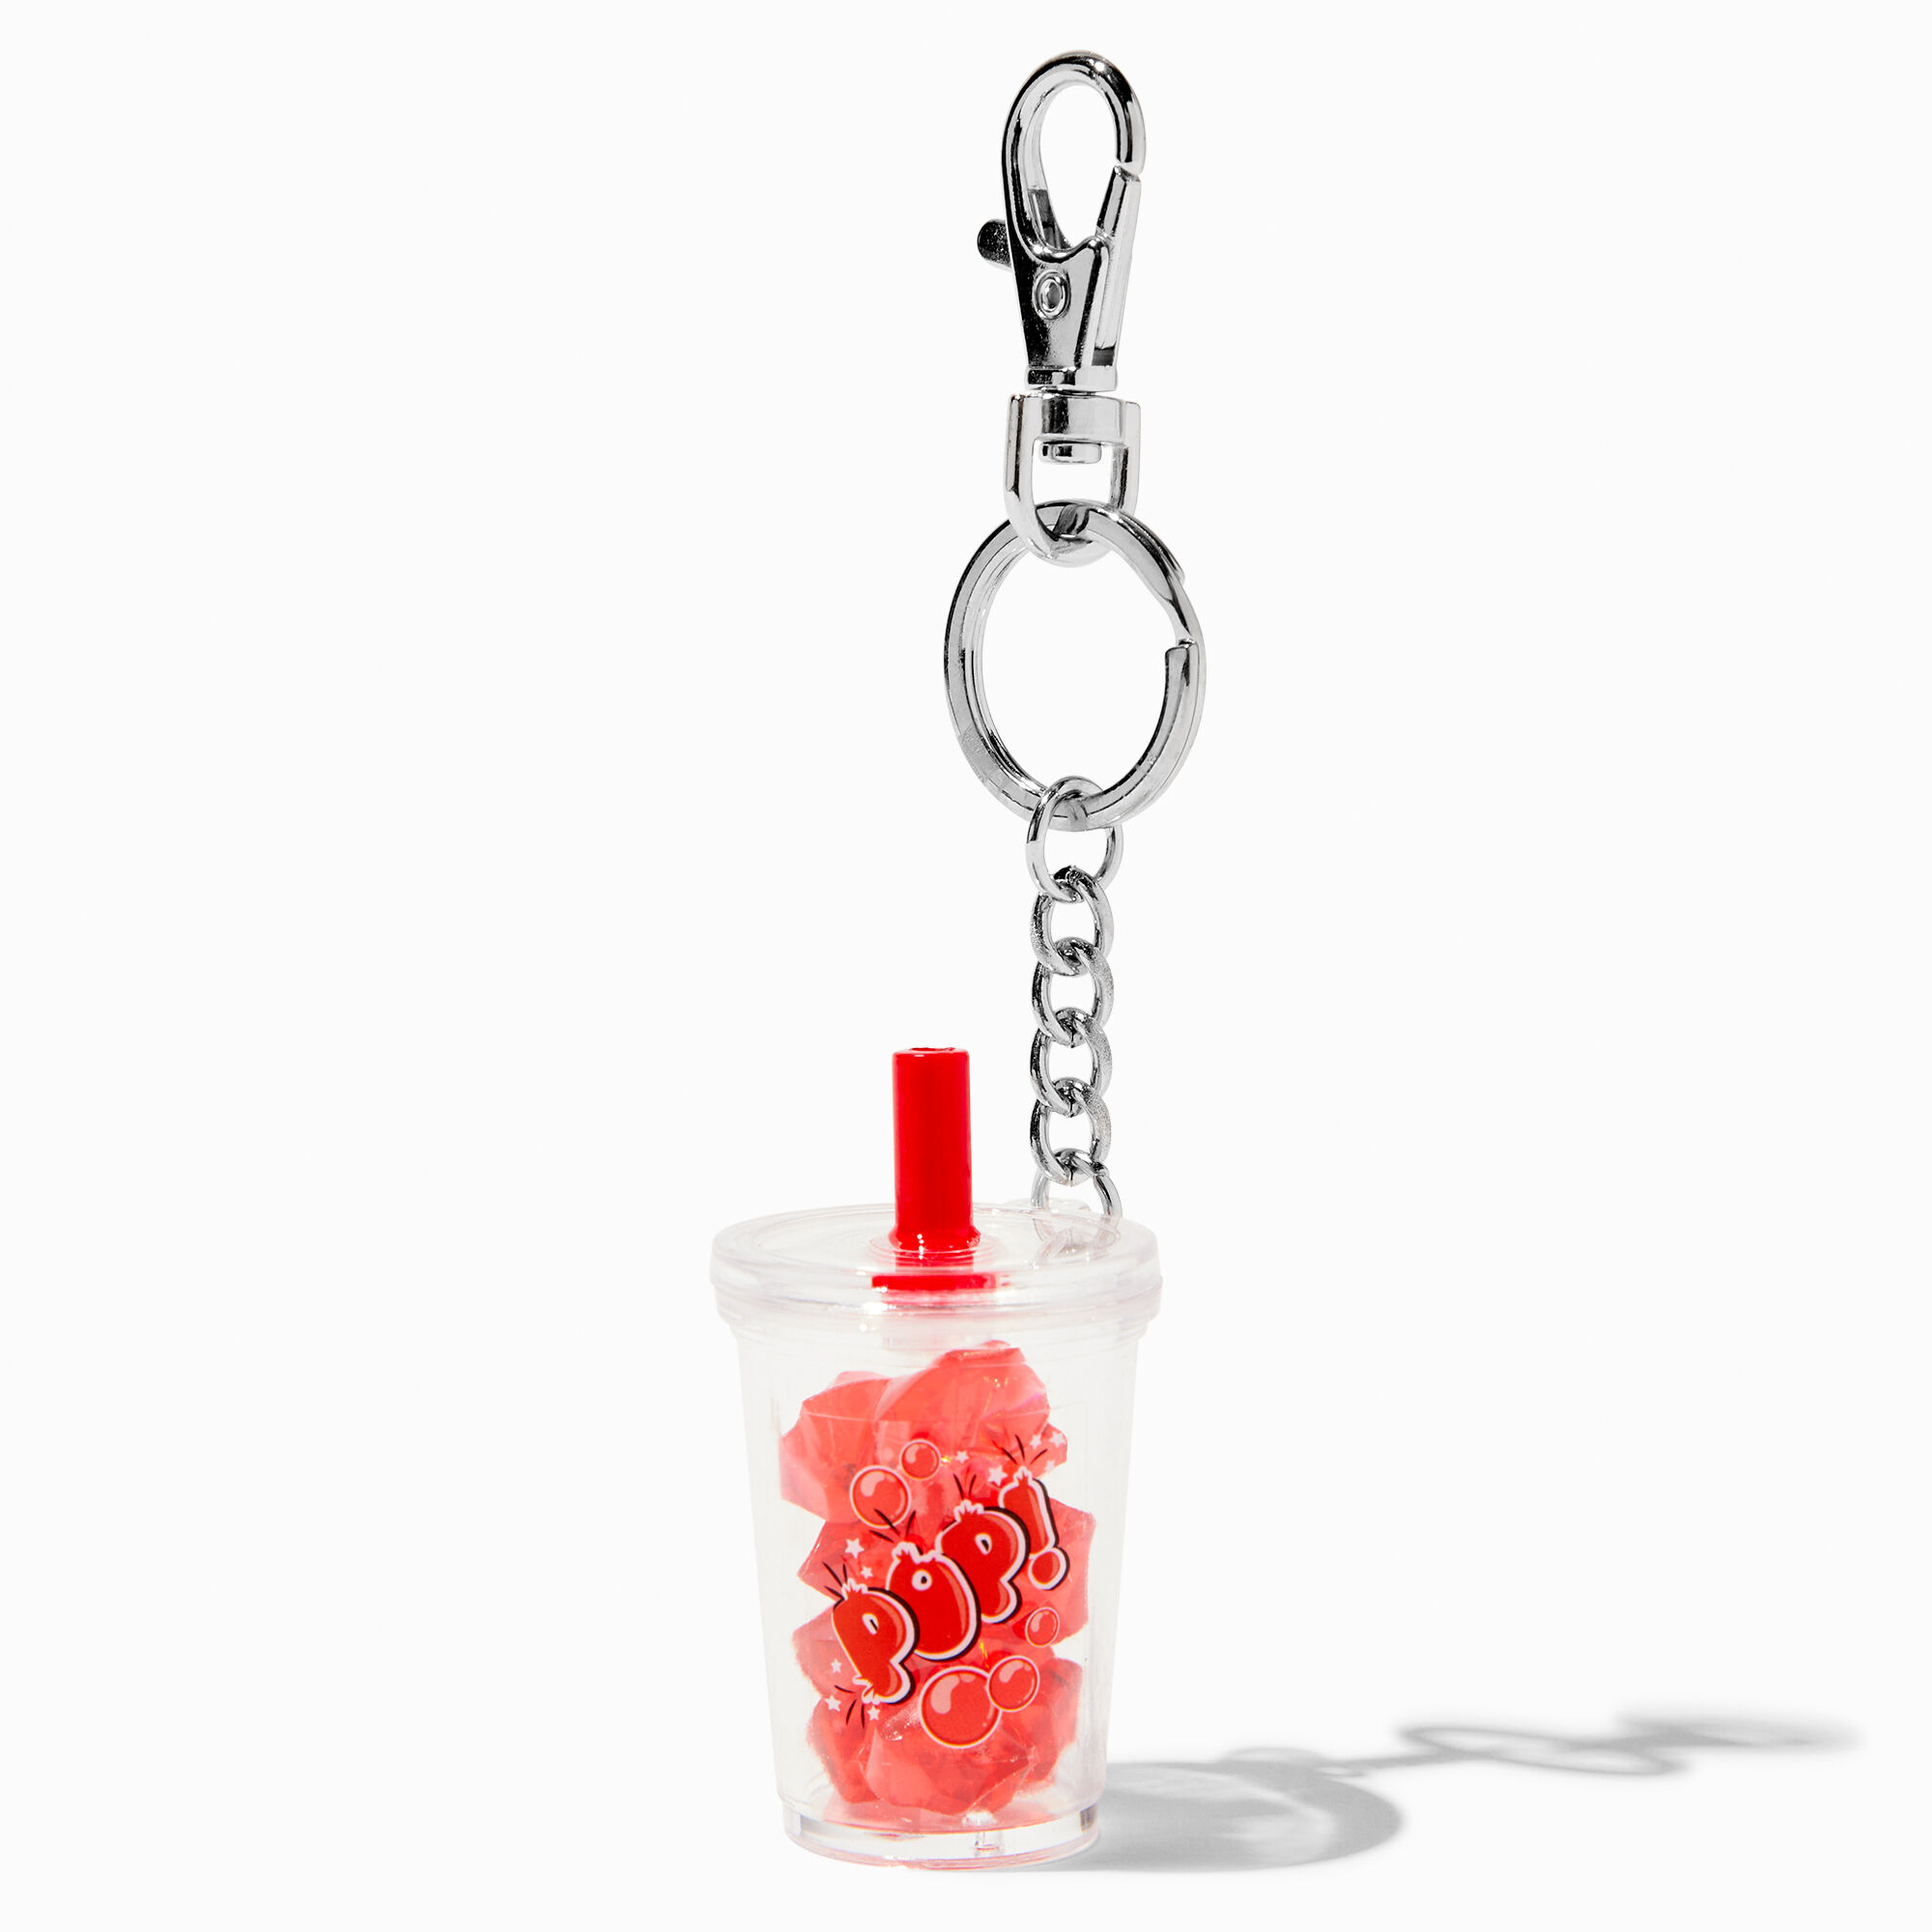 View Claires Pop Shaker Ice Keyring Red information